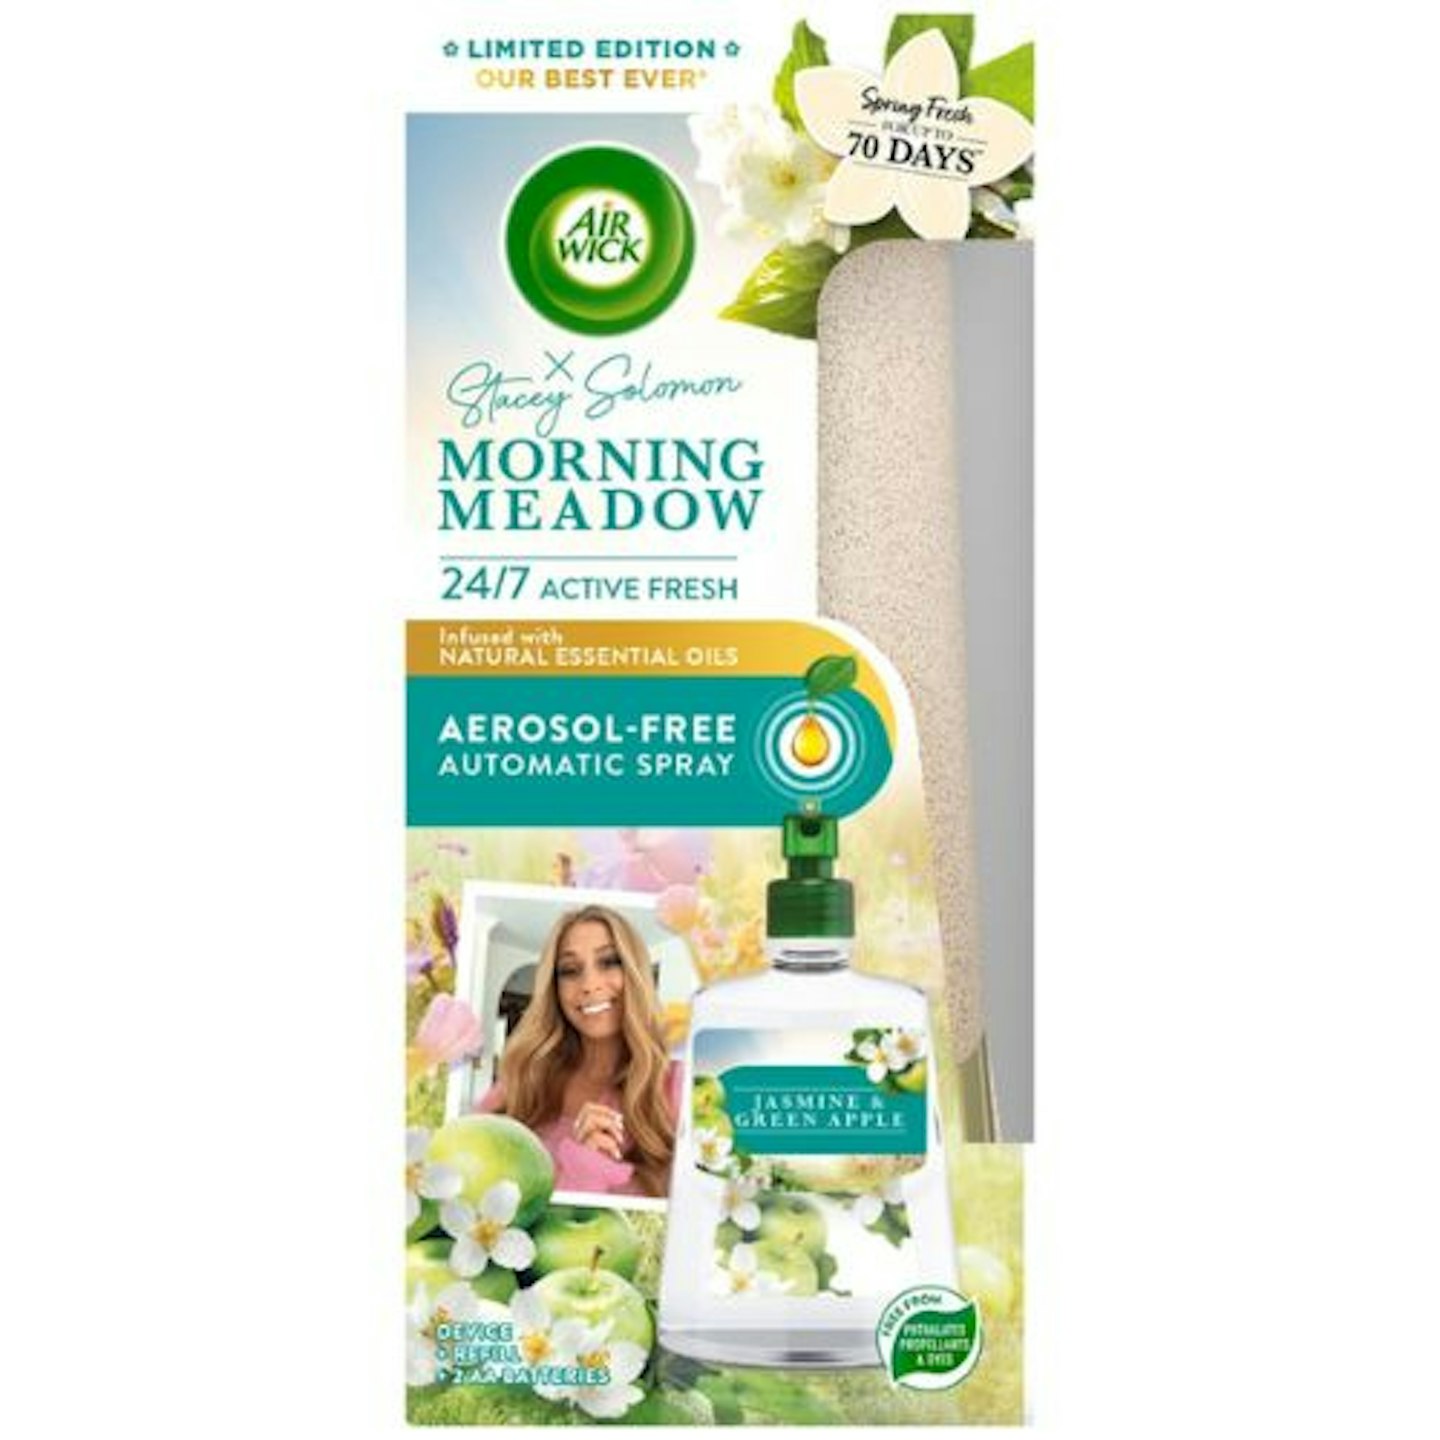 Air Wick Morning Meadow Automatic Spray Kit